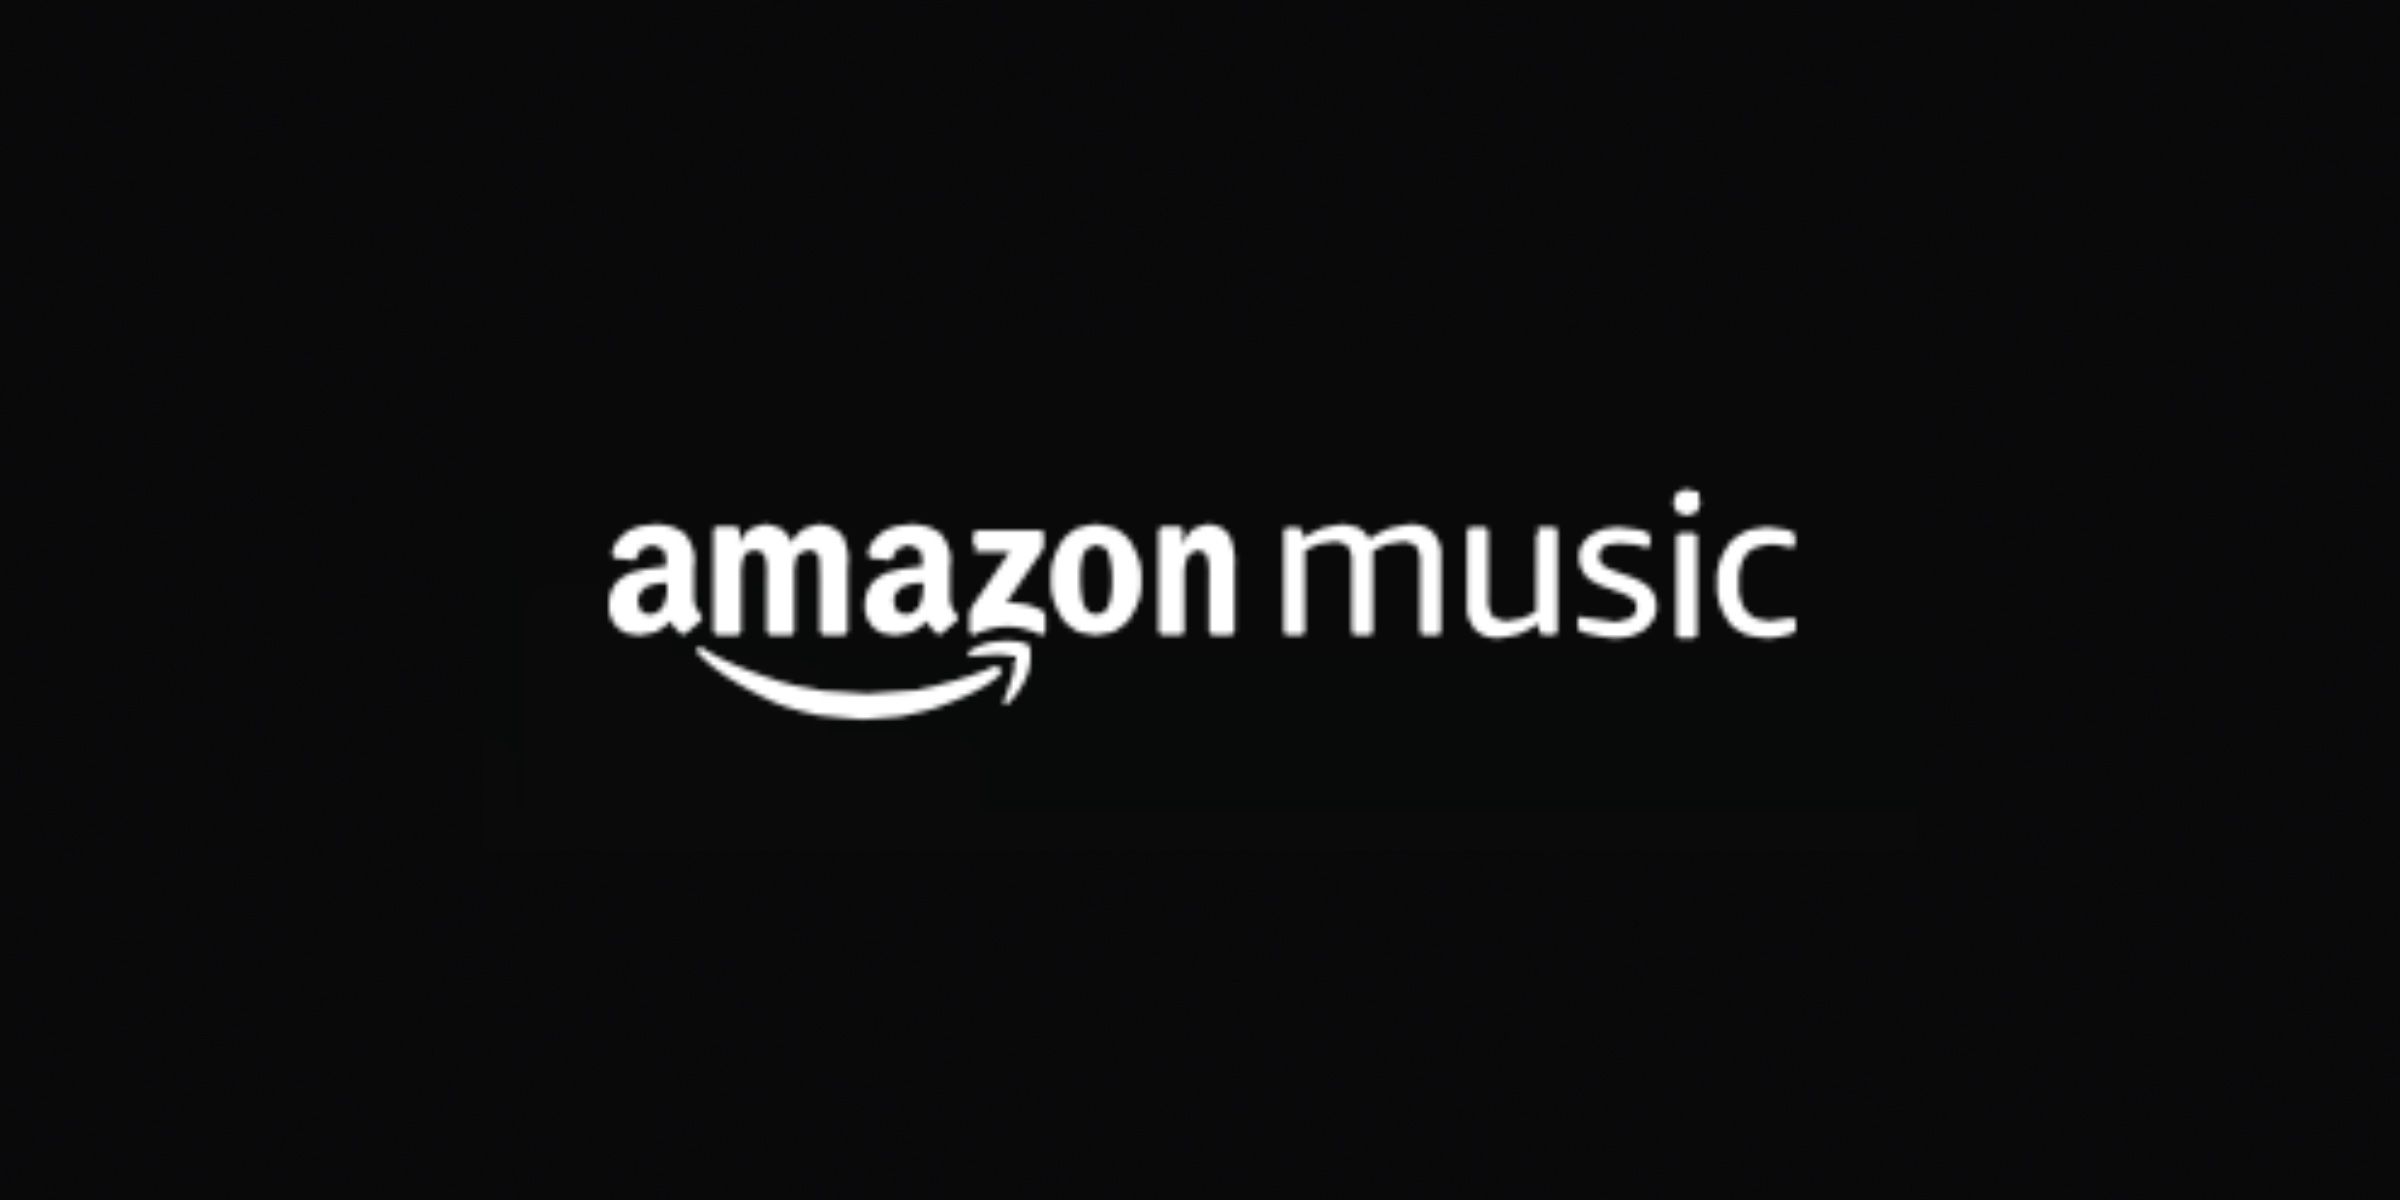 Amazon Music Unlimited Plans Are Now More Expensive In The U.S.